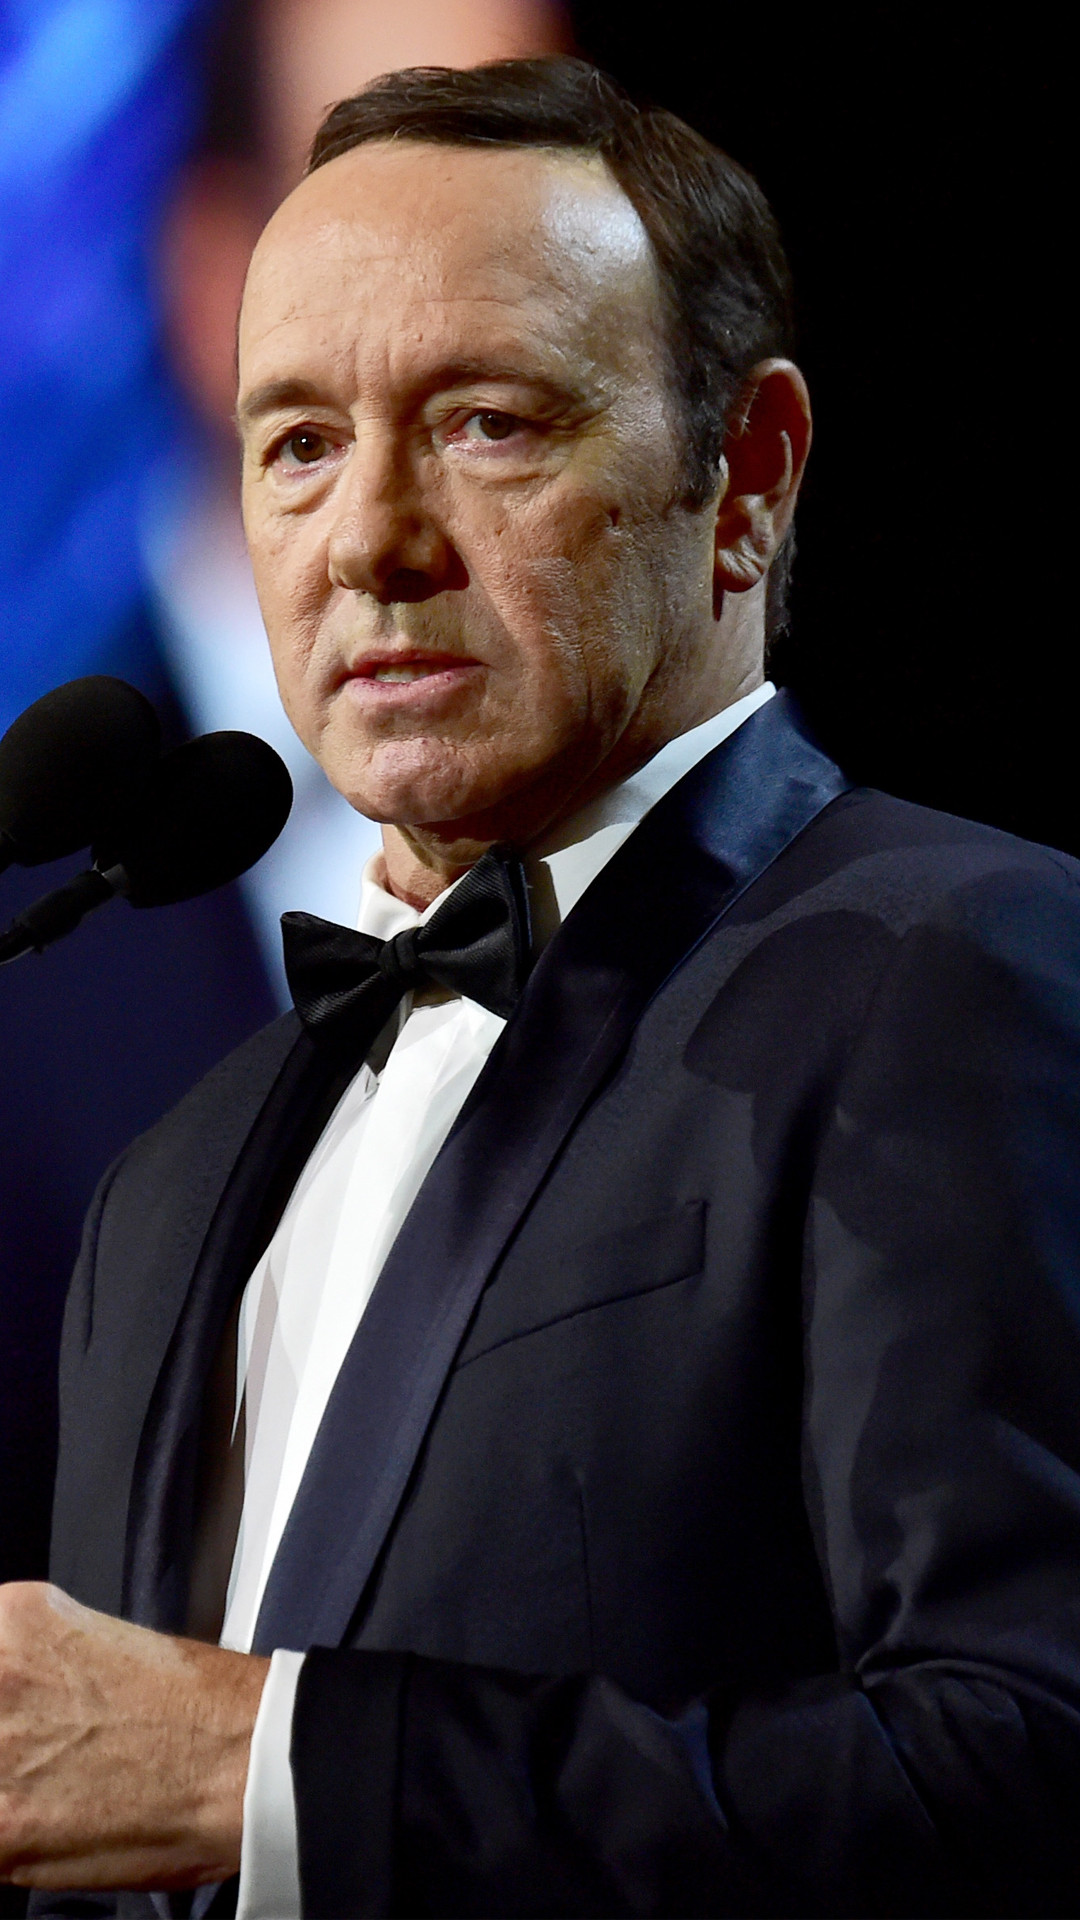 Kevin Spacey Under Review For Second Sexual Assault Case